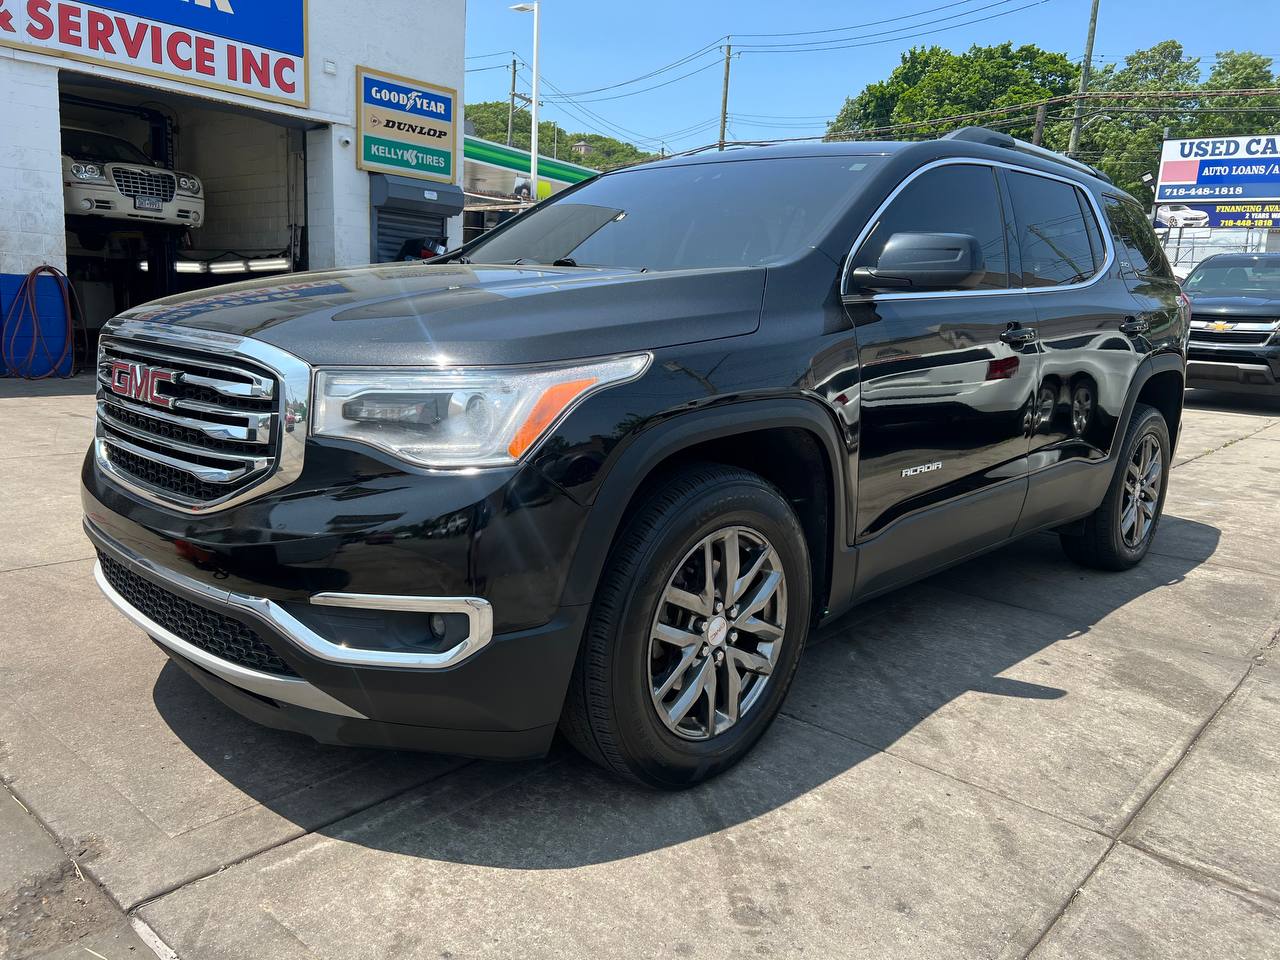 Used Car - 2017 GMC Acadia SLT for Sale in Staten Island, NY